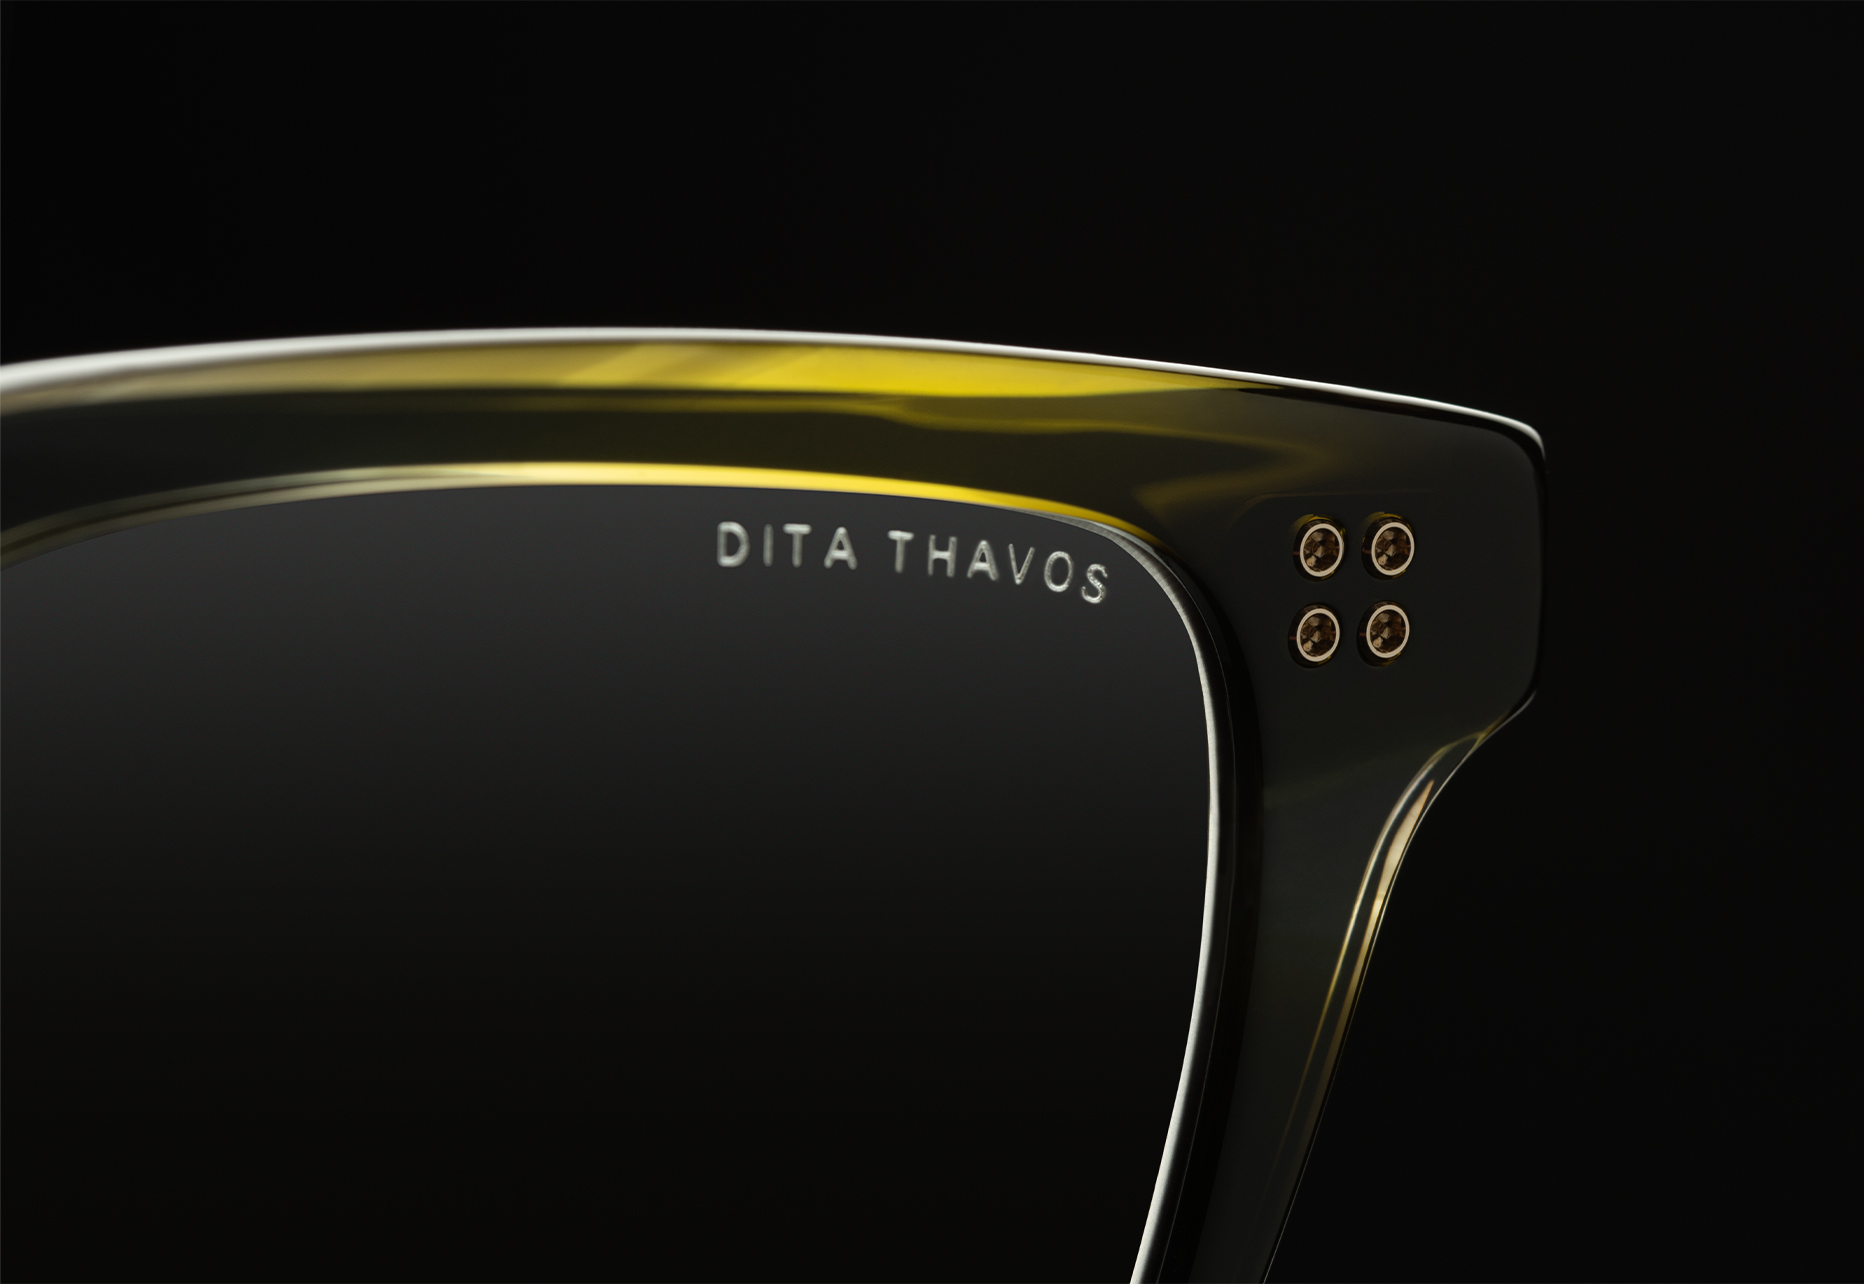 DITA THAVOS 100% UVA AND UVB LENS WITH ANTI-REFLECTIVE COATING  